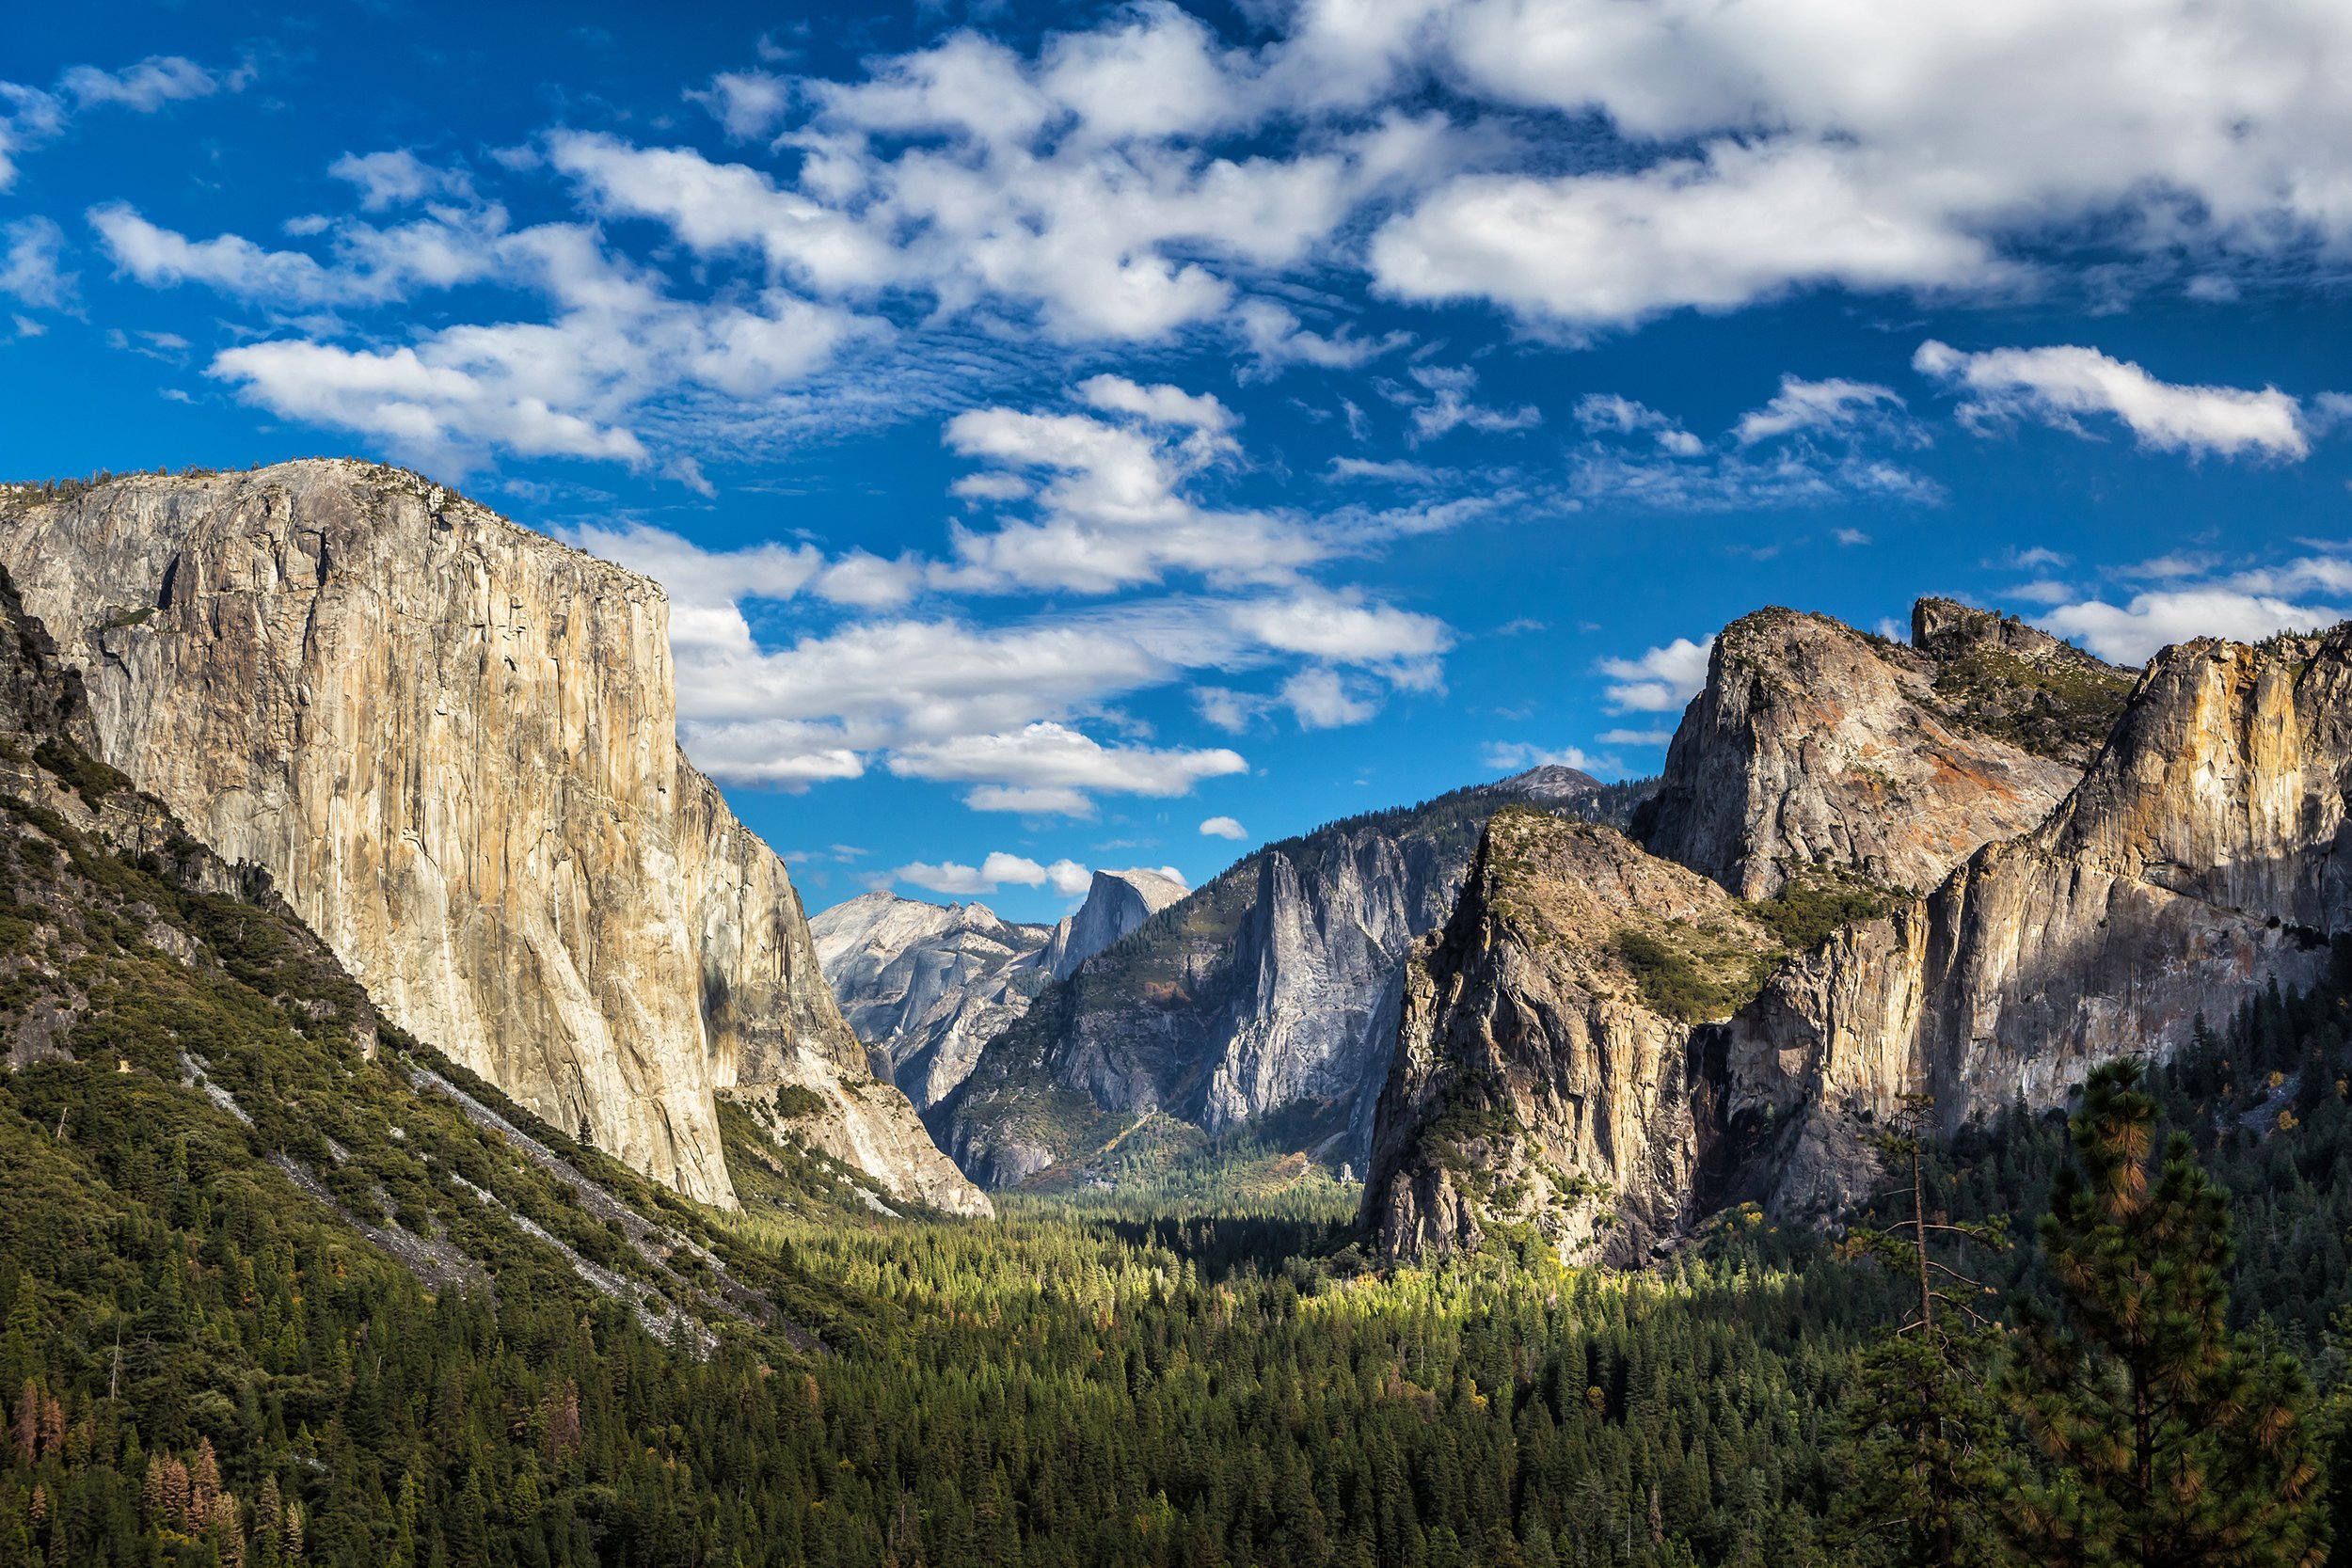 <p>Beautiful sequoia trees and the granite cliffs of El Capitan and Half Dome (also famously photographed by Adams) make this park certainly worth visiting. But summer is the worst time to come to this Northern California hotspot for anyone concerned about crowds and reservations, Schreve says.</p>